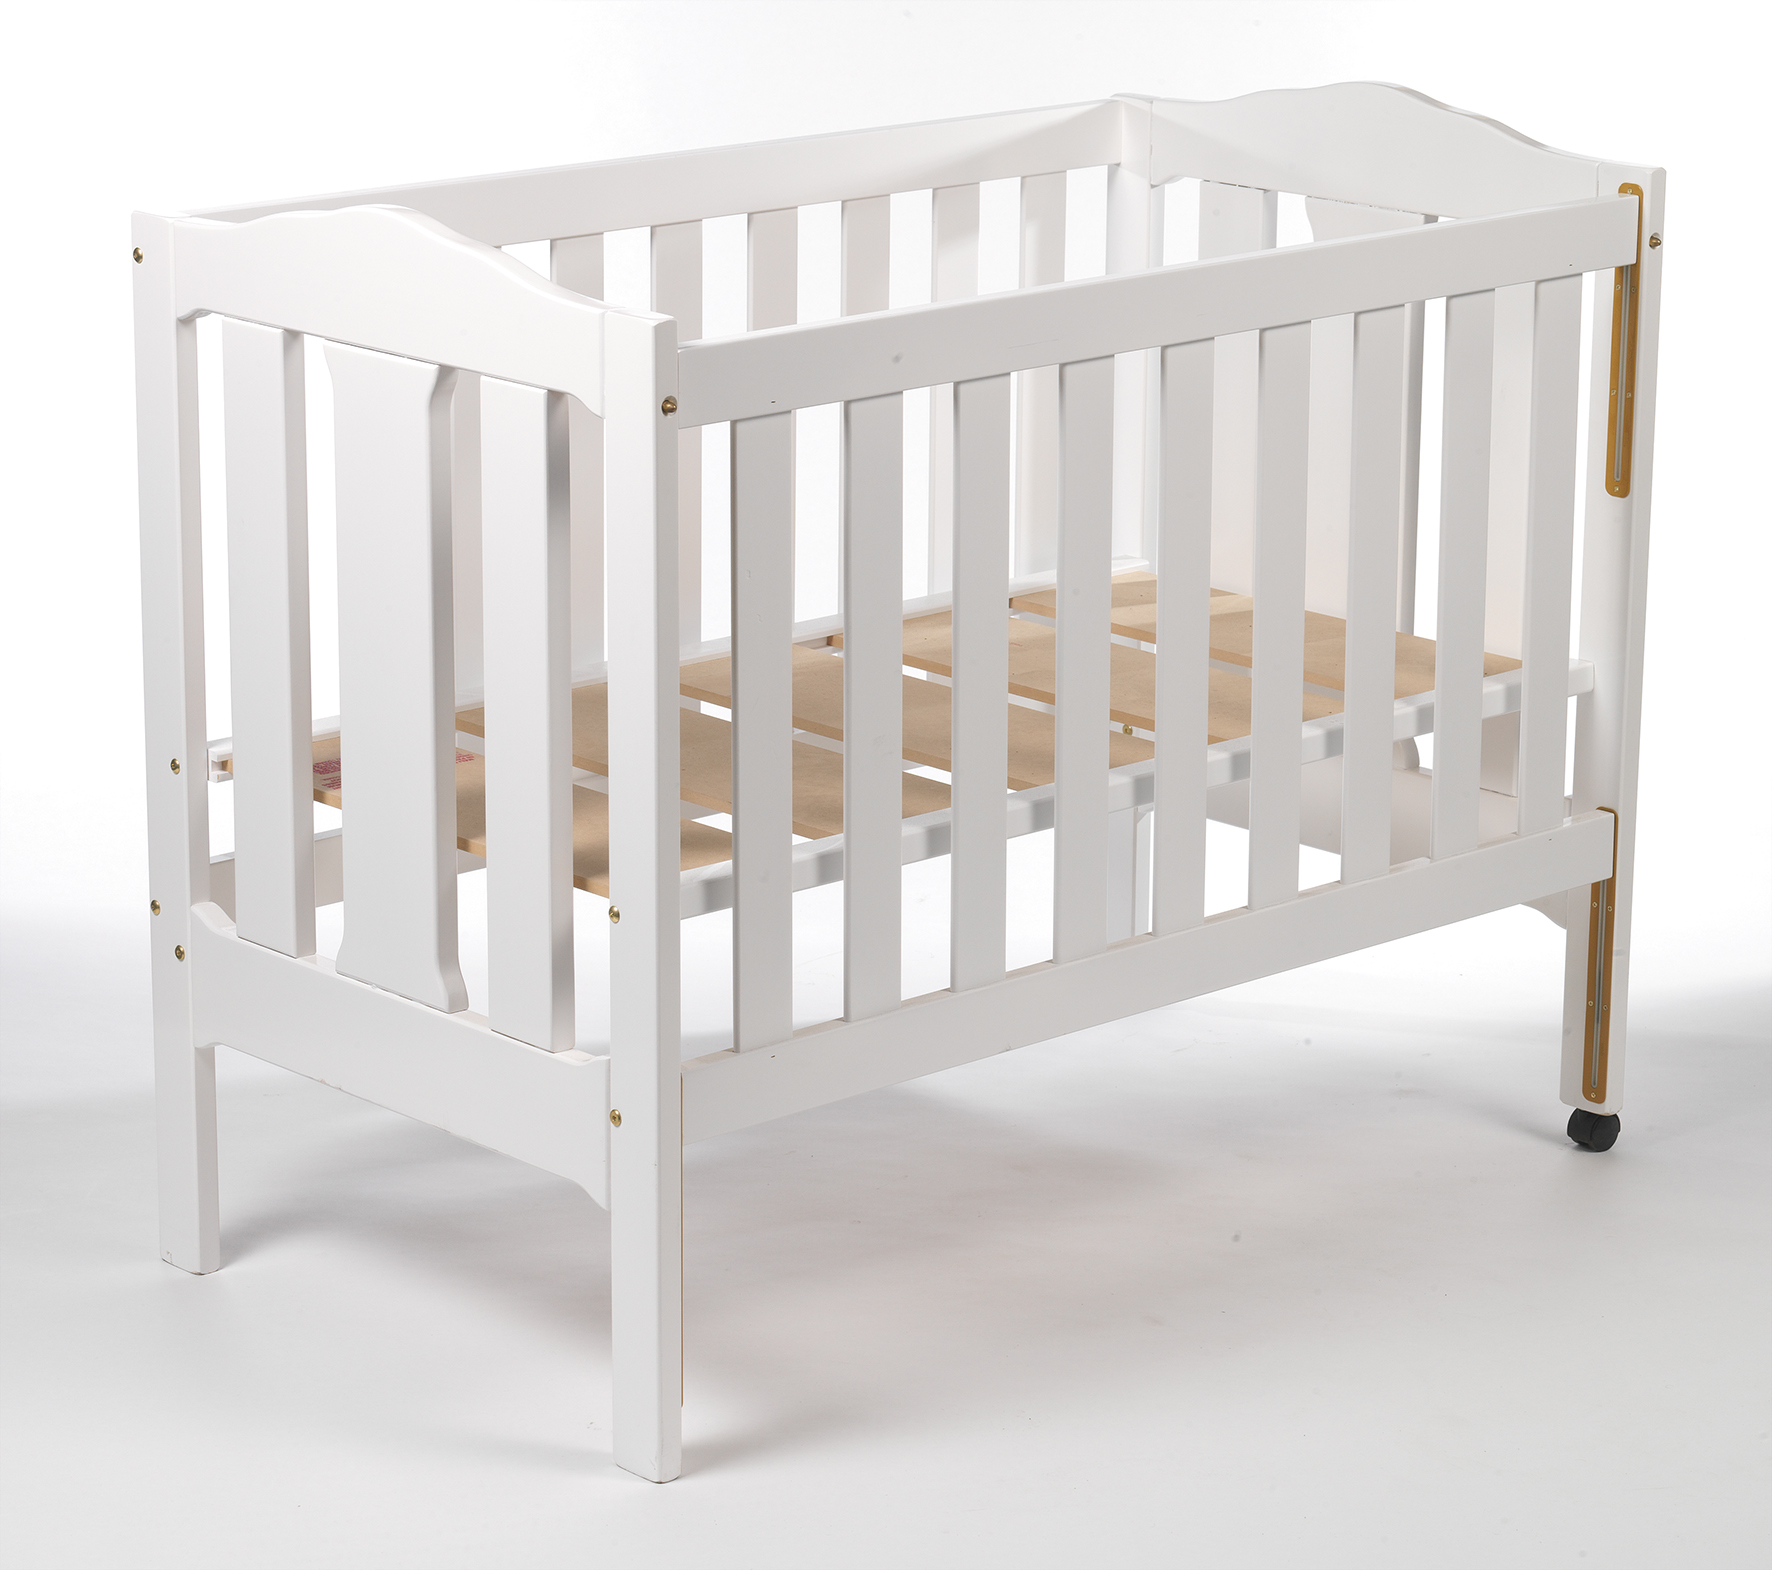 Cots with side protection household cots | product safety australia DXAQQDB